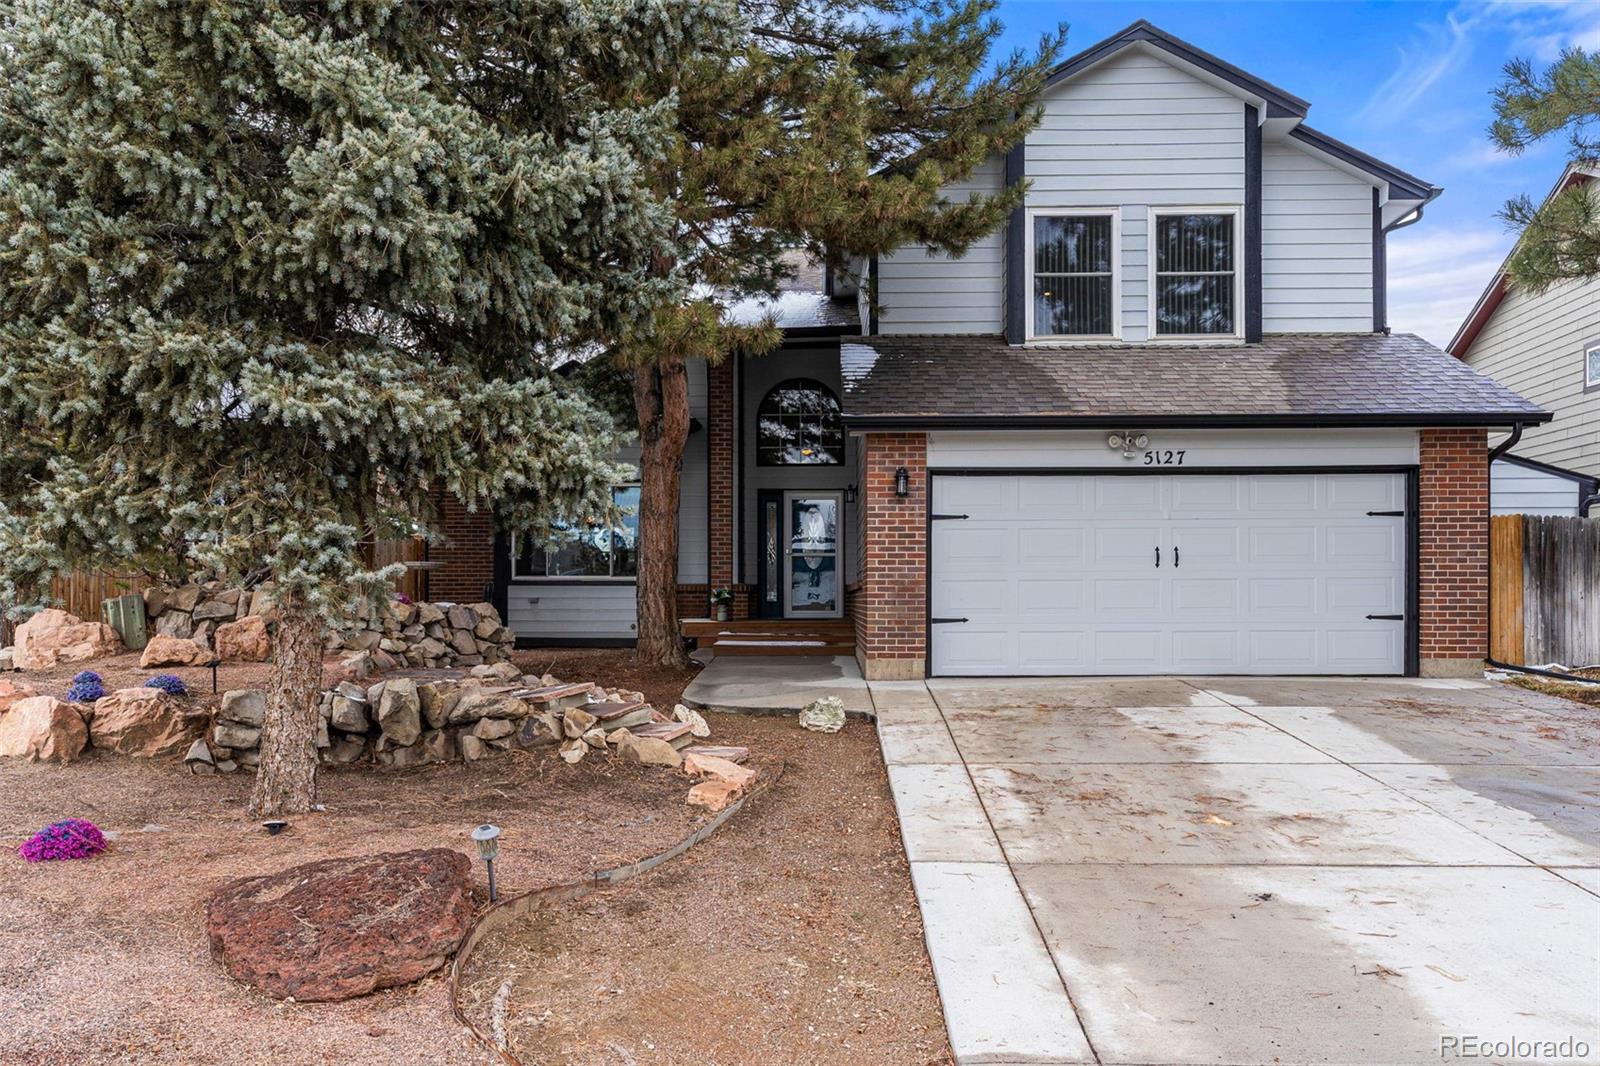 CMA Image for 5127 w 69th loop,Westminster, Colorado